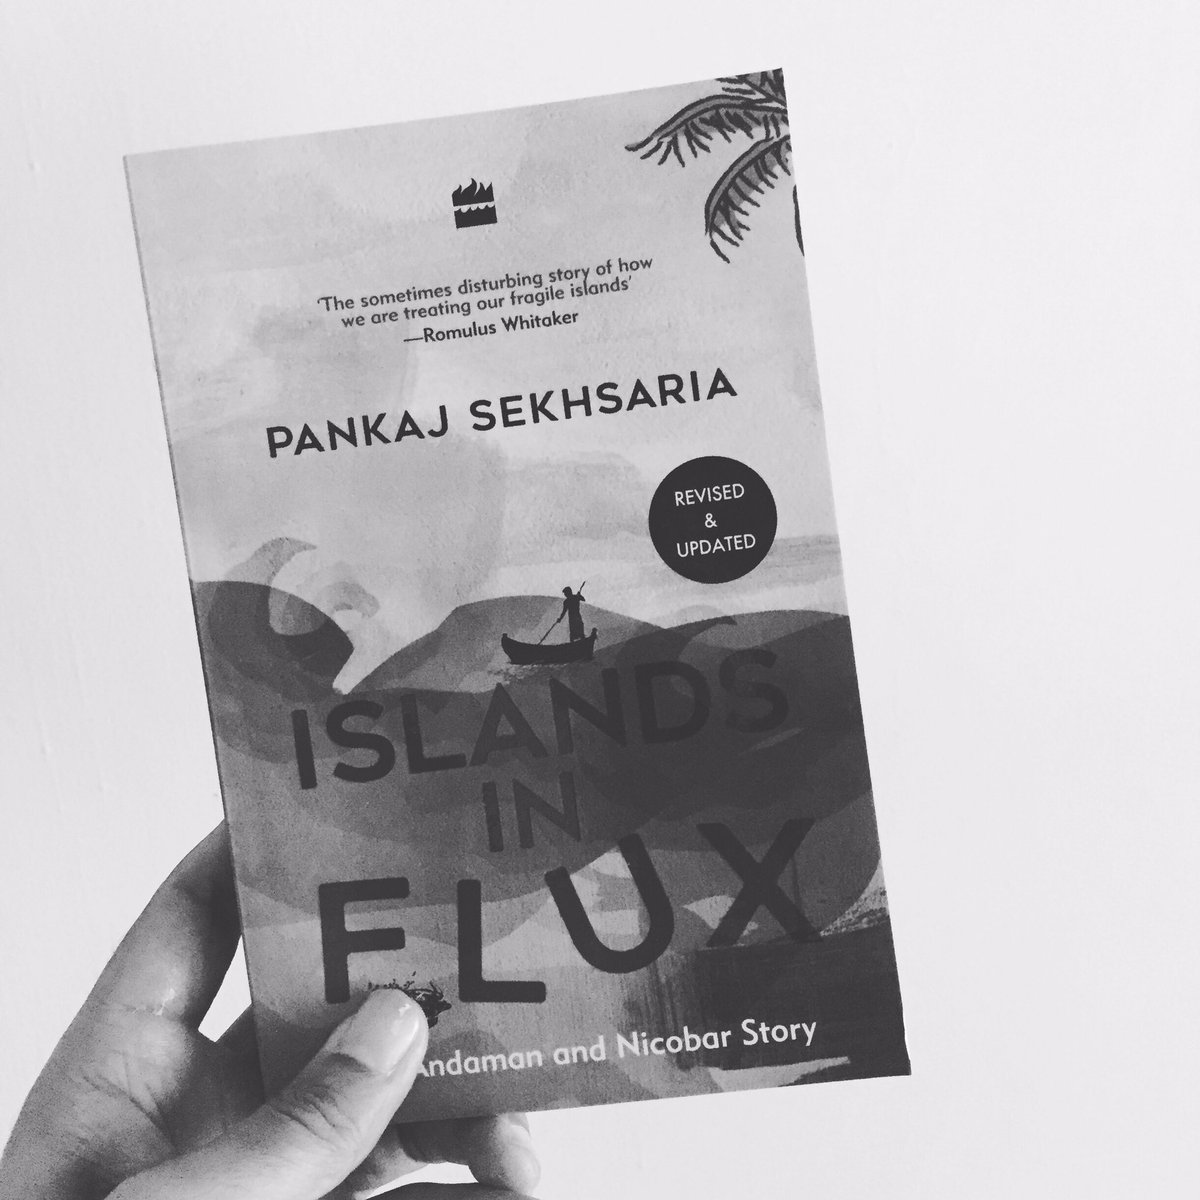 Stories of forests and deforestation, the Jarawas and the ATR, endemics and exotics, oceans, jellyfish and turtles, wildlife and conservation, indigenous peoples and the tsunami in 'The Last Wave' + 'Islands in Flux - Write to psekhsaria@gmail.com to order copies.